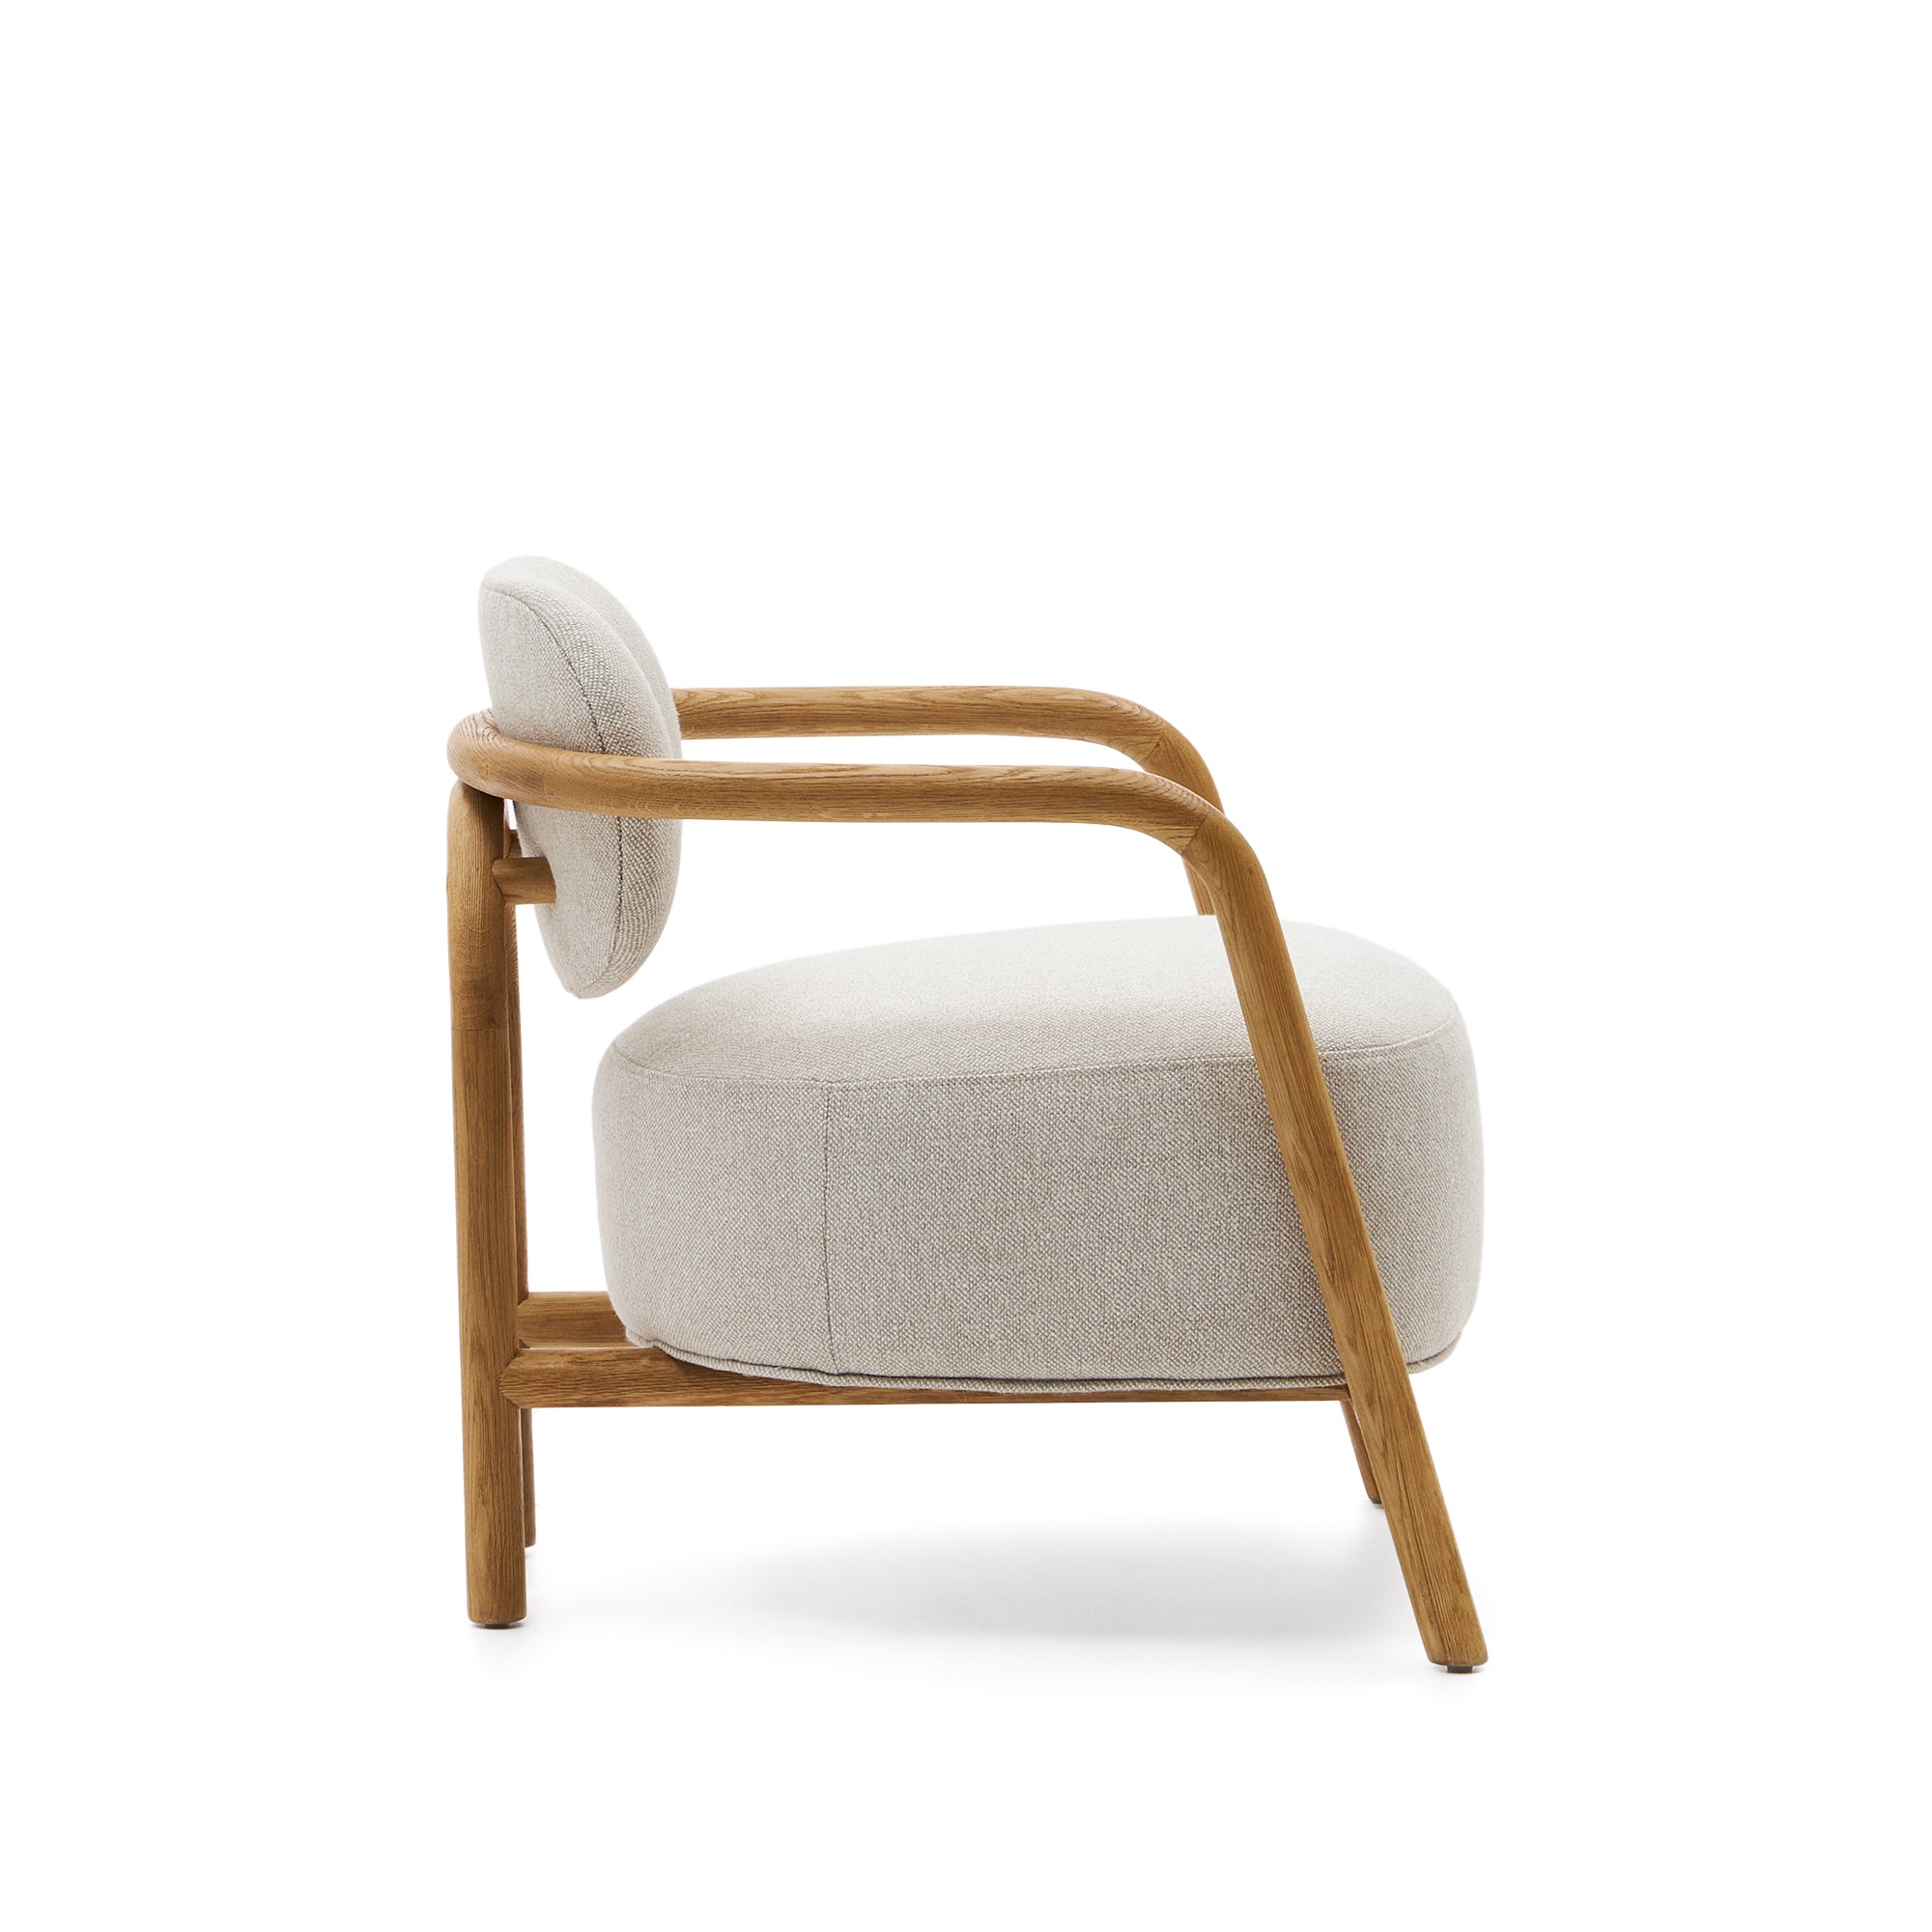 Melqui beige chair in solid oak wood a natural finish